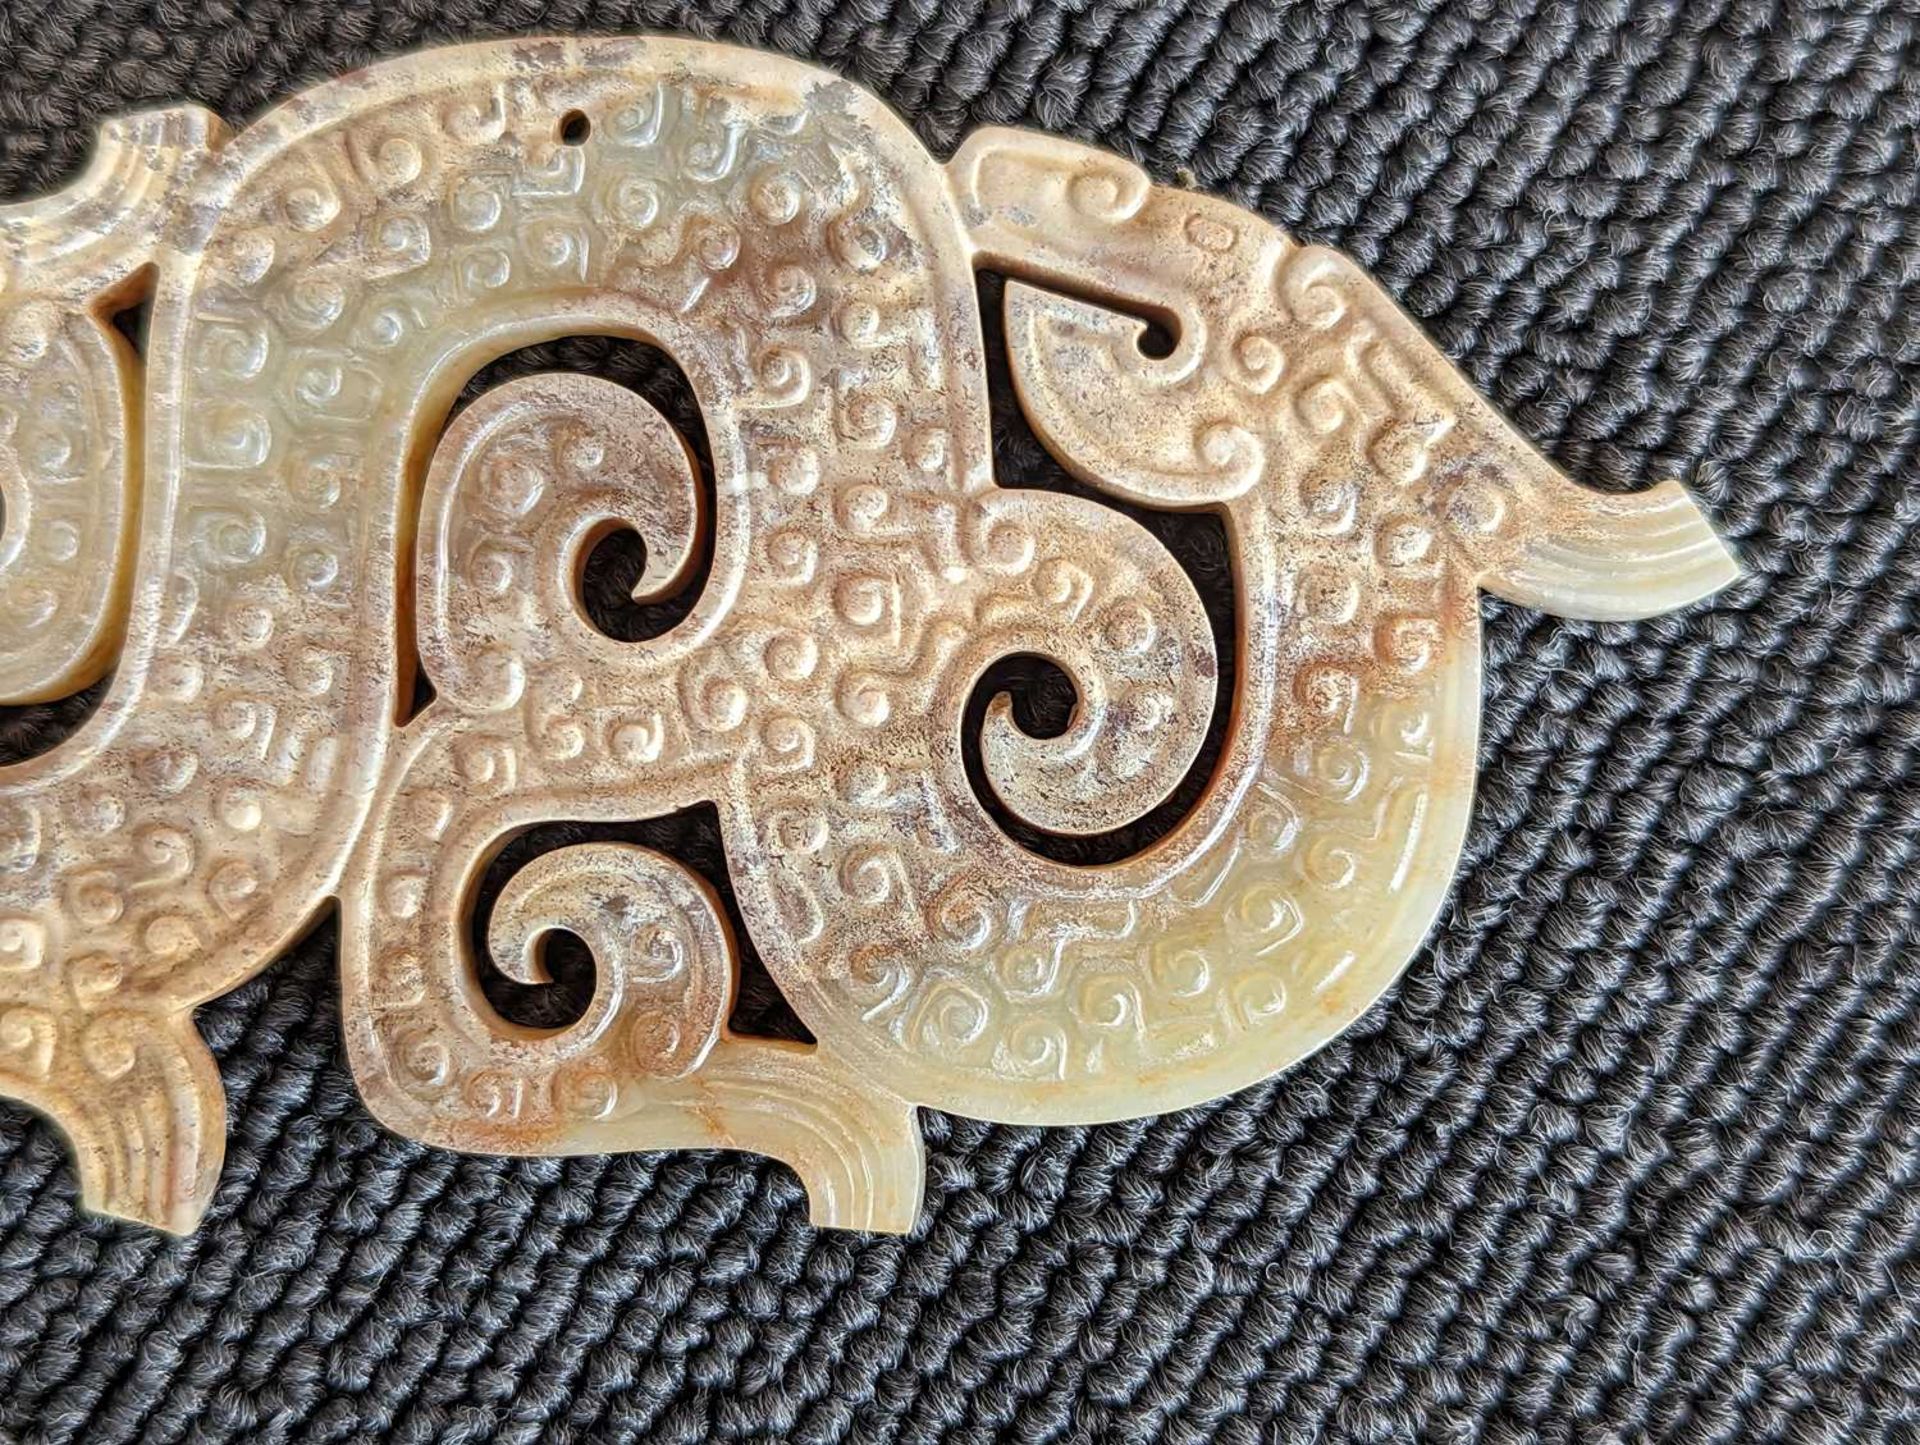 DRAGON-SHAPED PENDANT WITH CIRRUS CLOUD STRIPES - Image 15 of 25